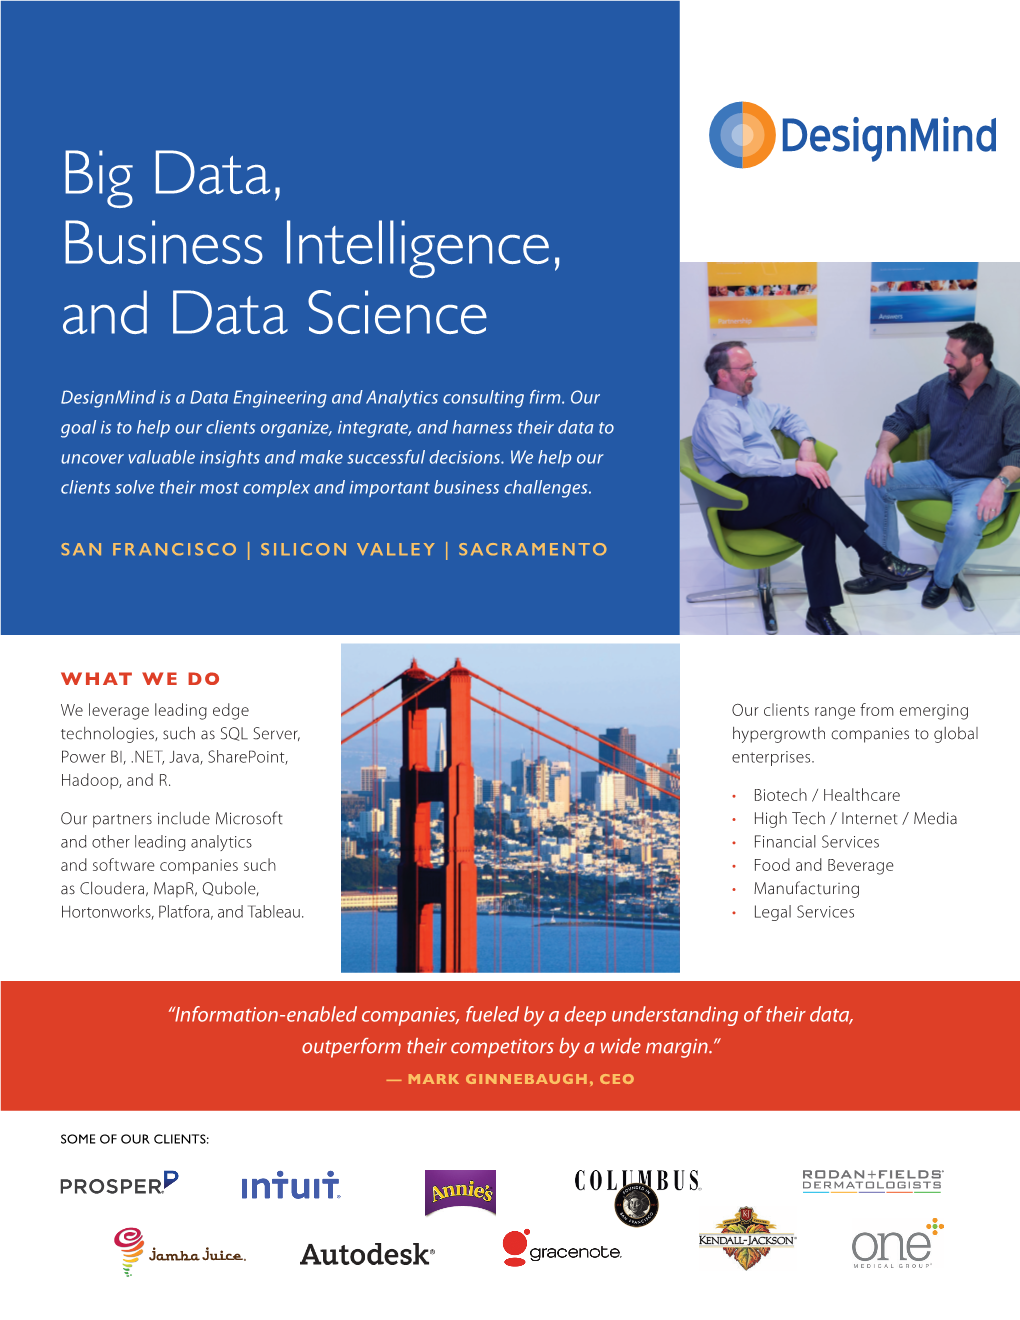 Big Data, Business Intelligence, and Data Science